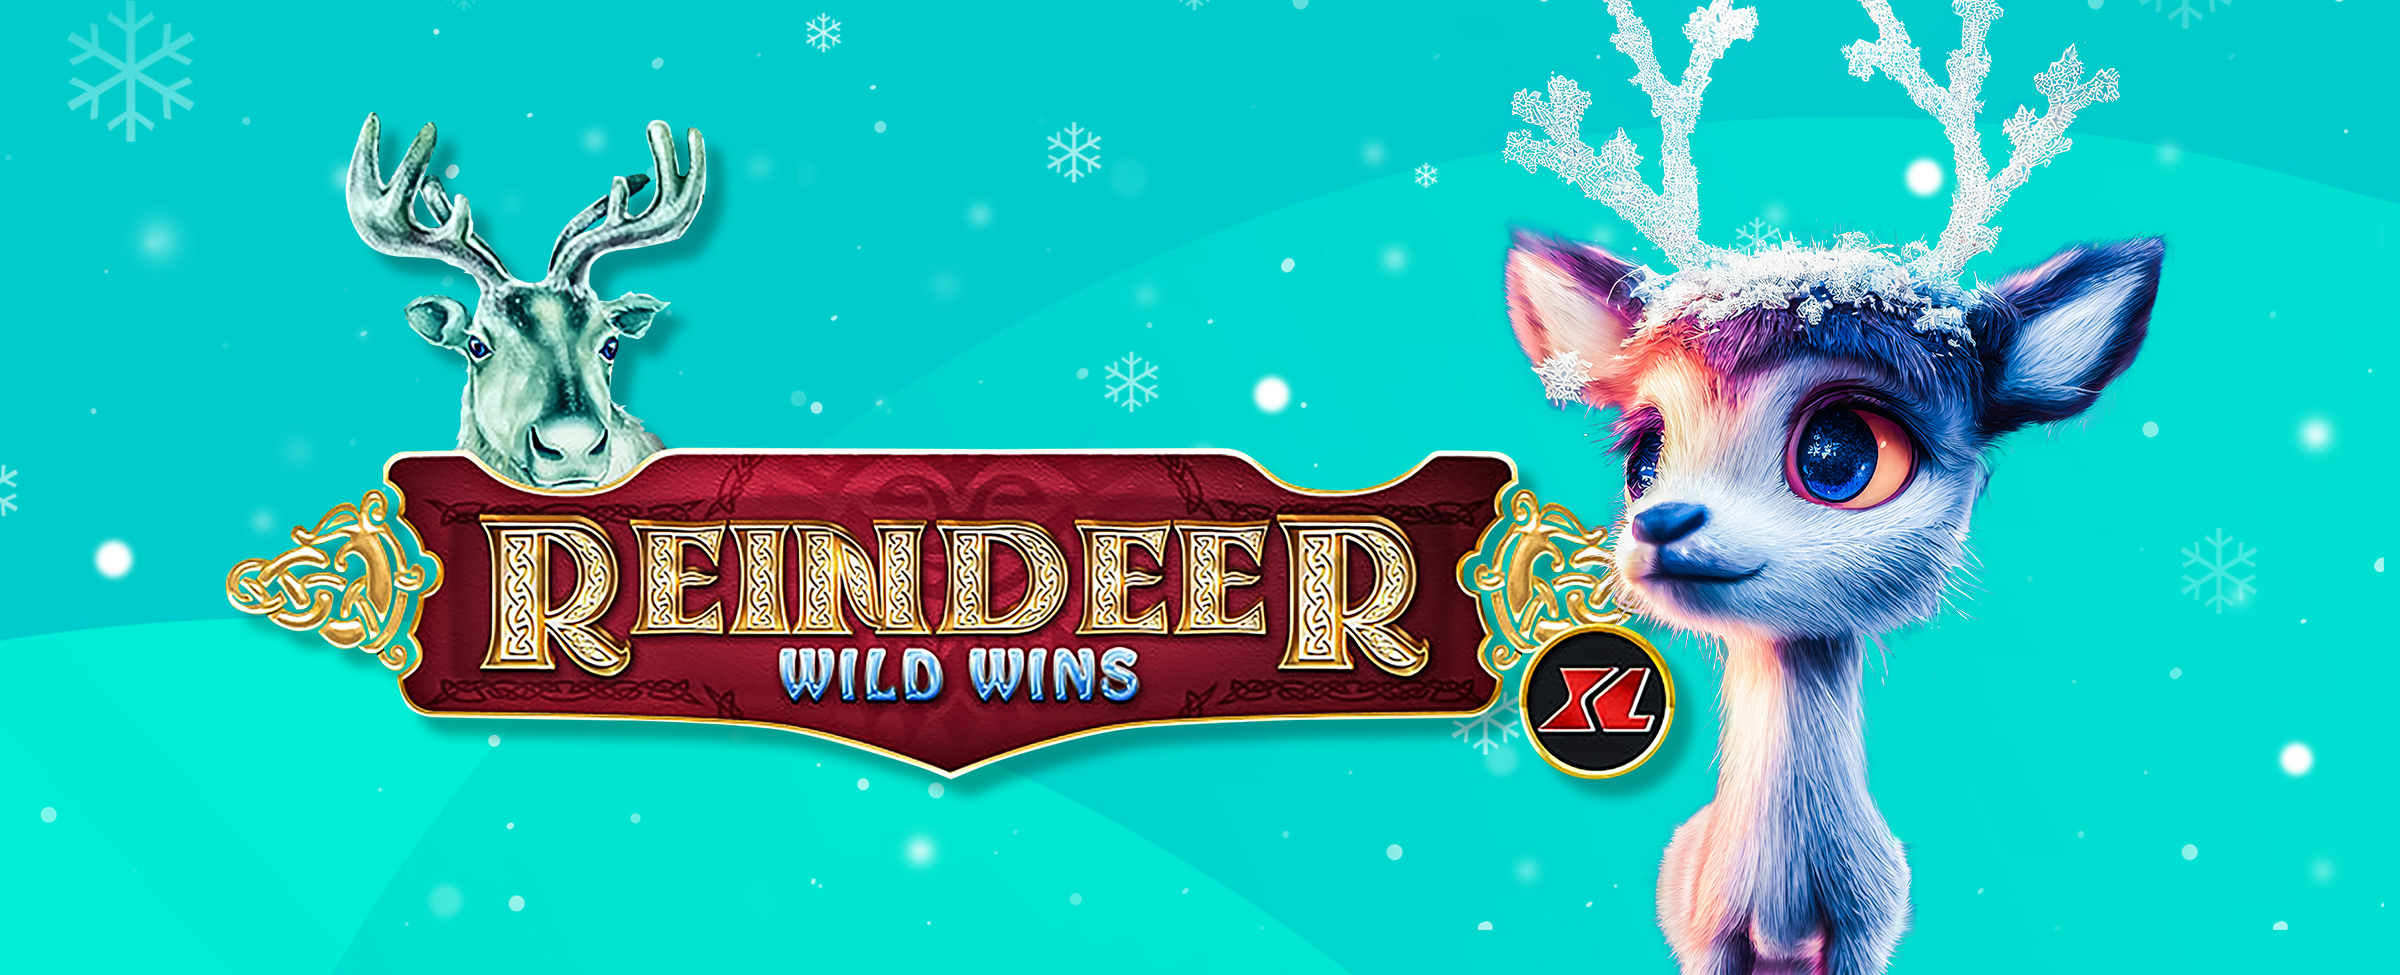 An animated 3D reindeer with antlers in snow-like formation appears to the right of the SlotsLV slot game logo for Reindeer Wild Winds XL.